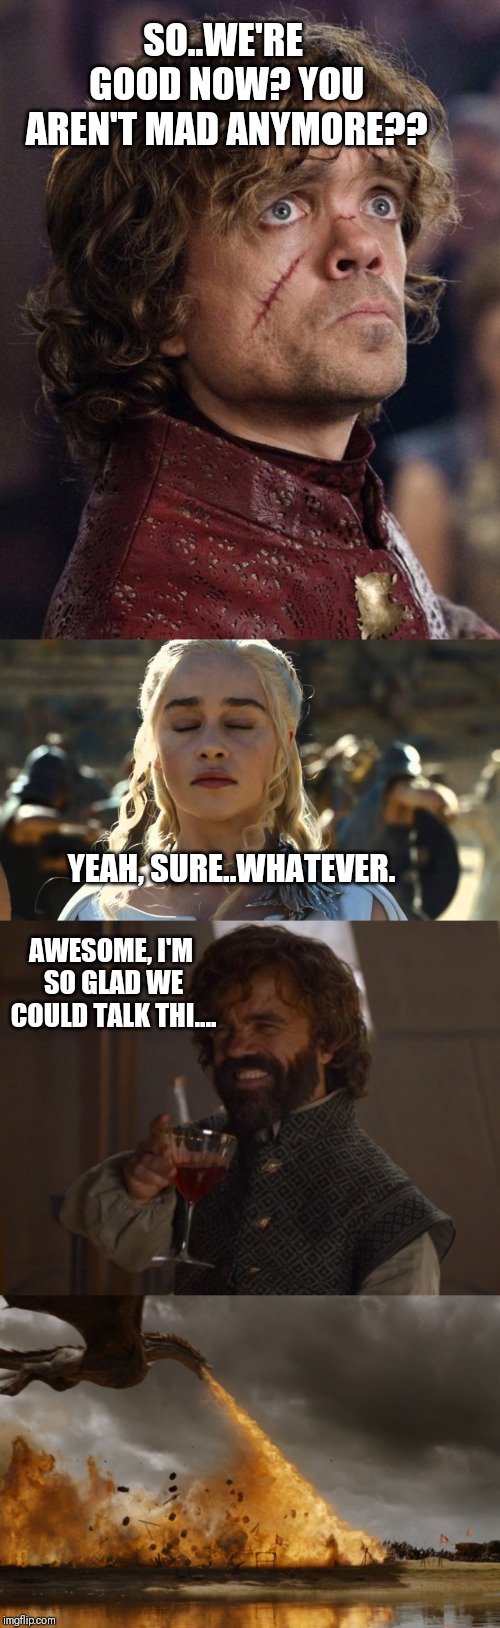 SO..WE'RE GOOD NOW? YOU AREN'T MAD ANYMORE?? YEAH, SURE..WHATEVER. AWESOME, I'M SO GLAD WE COULD TALK THI.... | image tagged in look on your face when game of thrones season ends | made w/ Imgflip meme maker